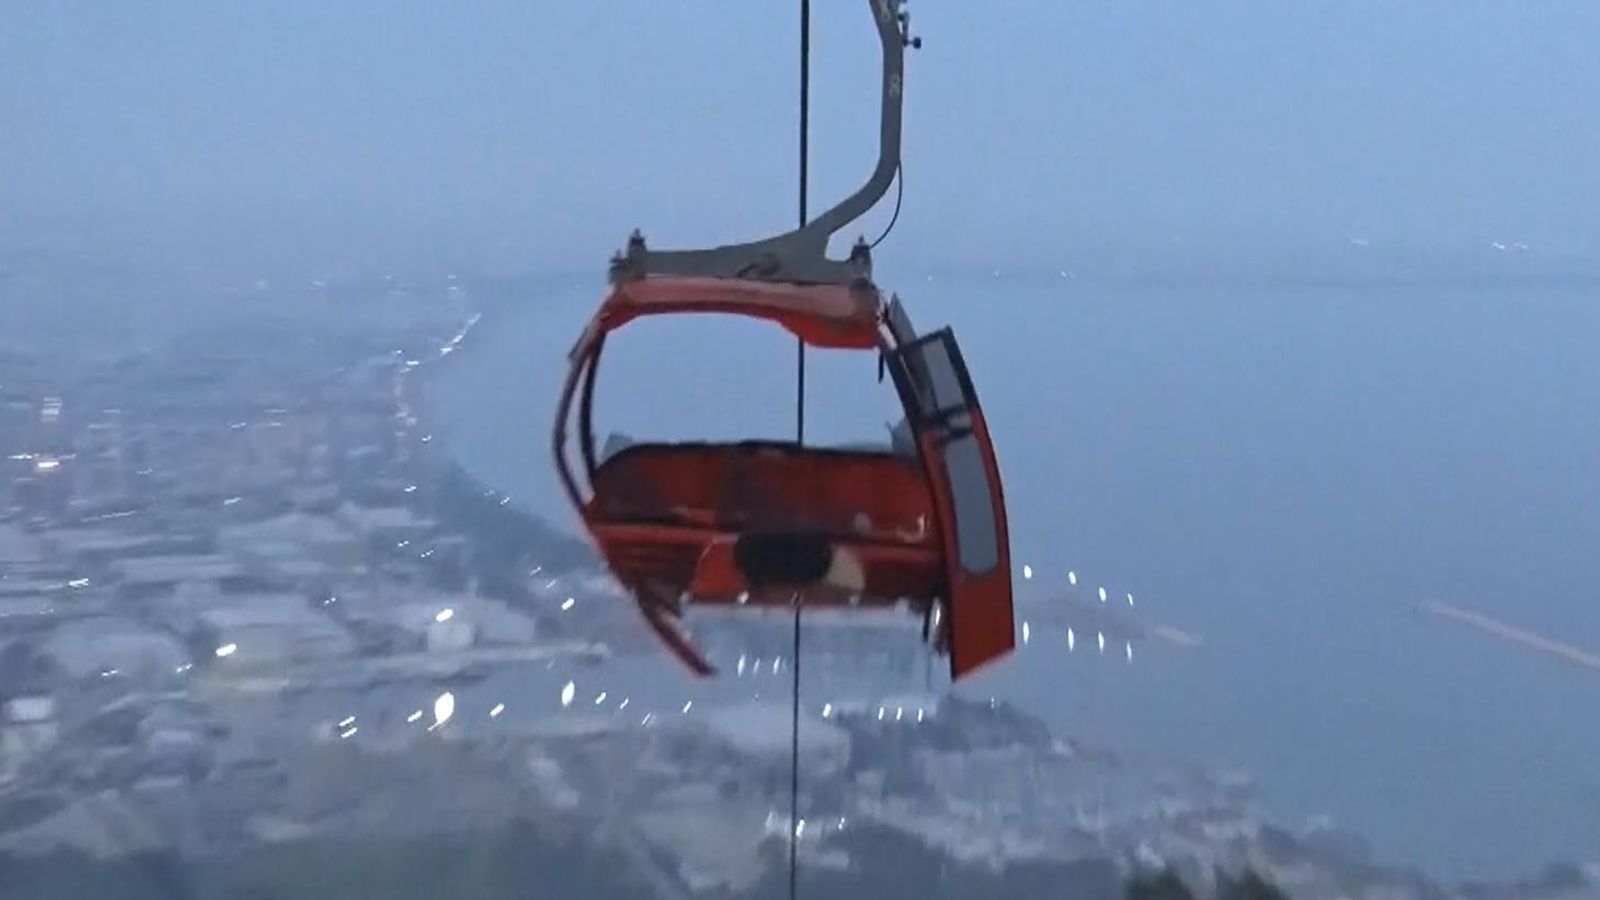 Turkey: Cable car hits pole, sends passengers plummeting to mountainside below